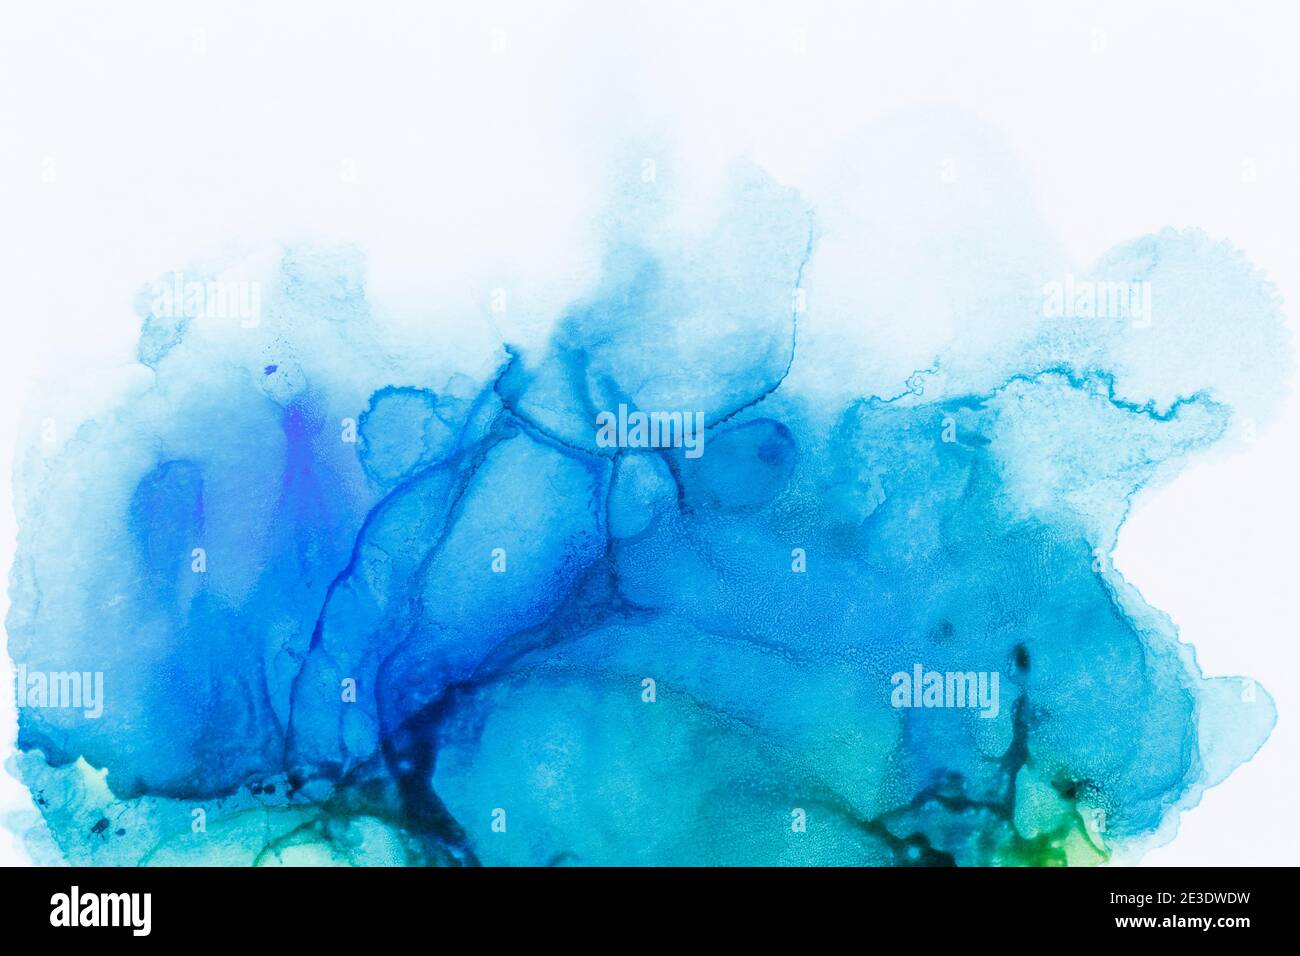 Macro close-up of abstract blue alcohol ink texture on white. Fluid ink, colorful textured background. Vibrant color. Art for design. Stock Photo